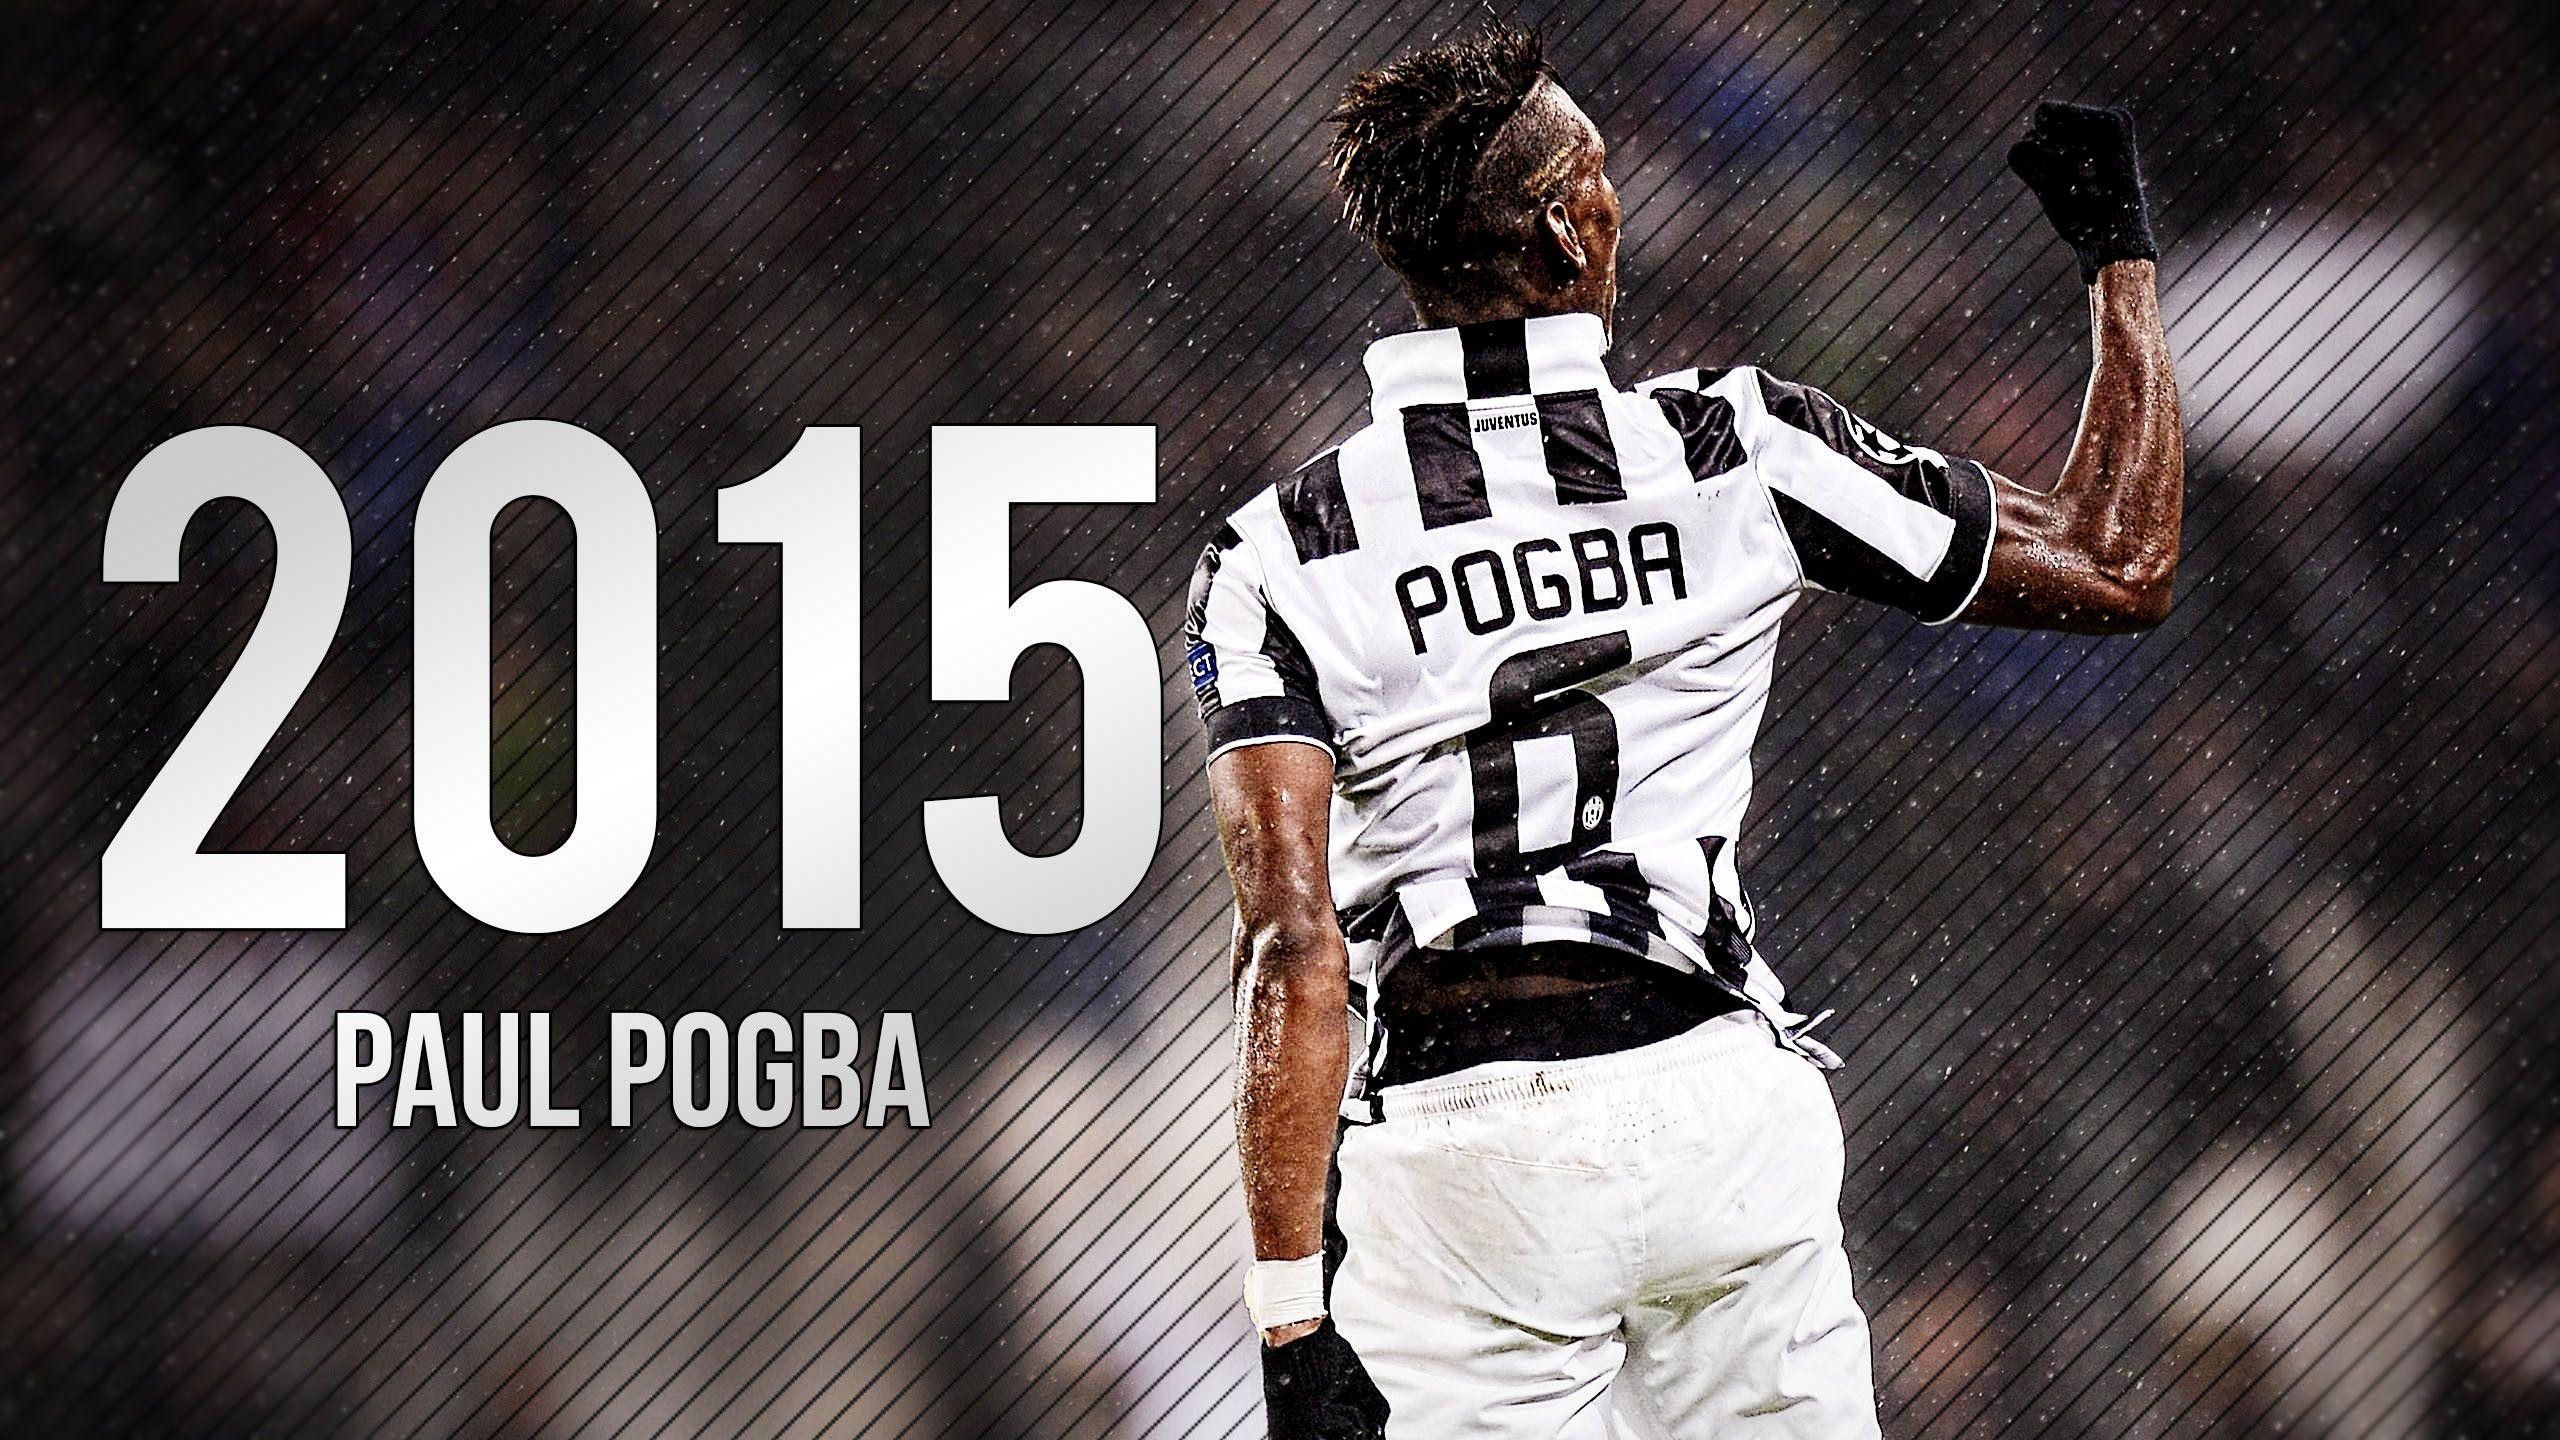 2560x1440 Paul Pogba Wallpapers High Resolution and Quality DownloadPaul Pogba